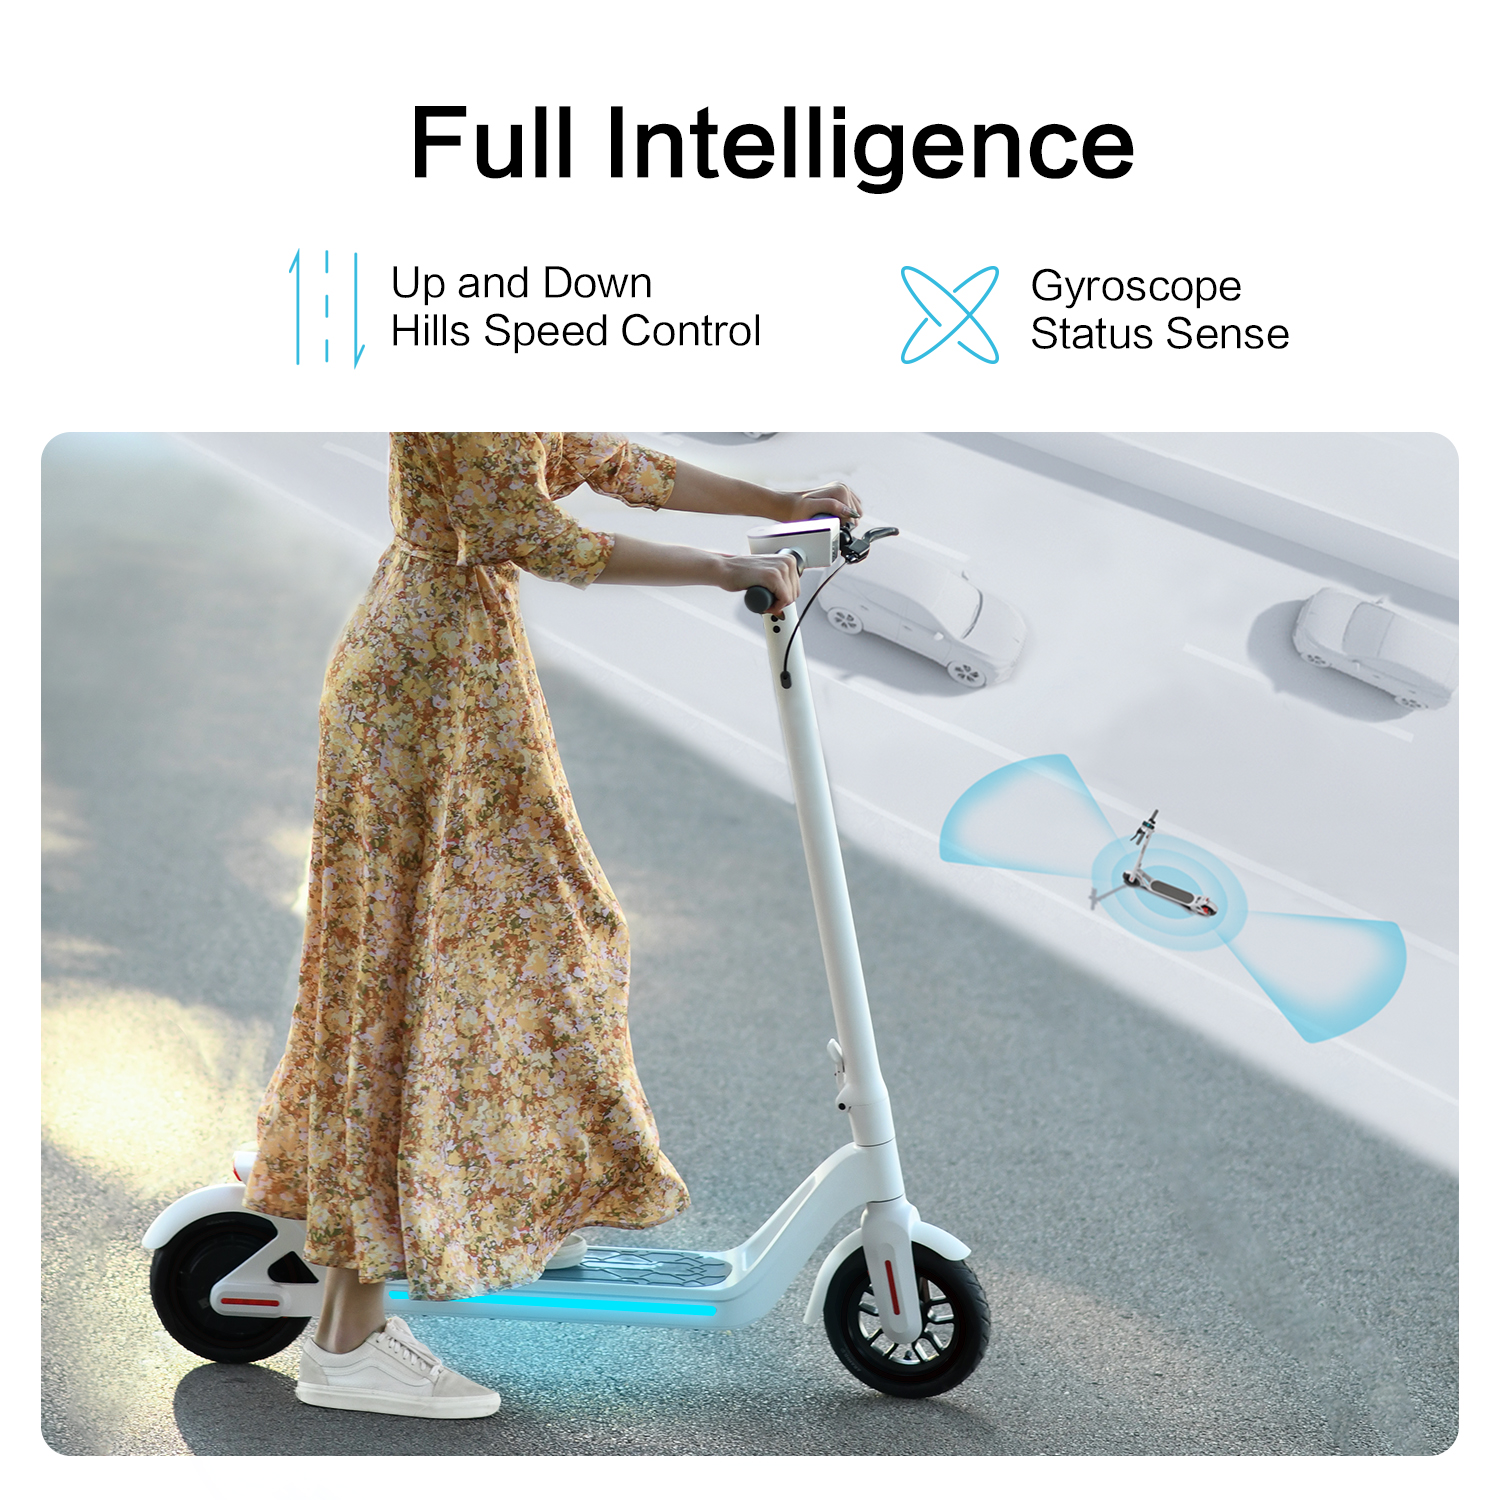 Electric Scooter A8 White